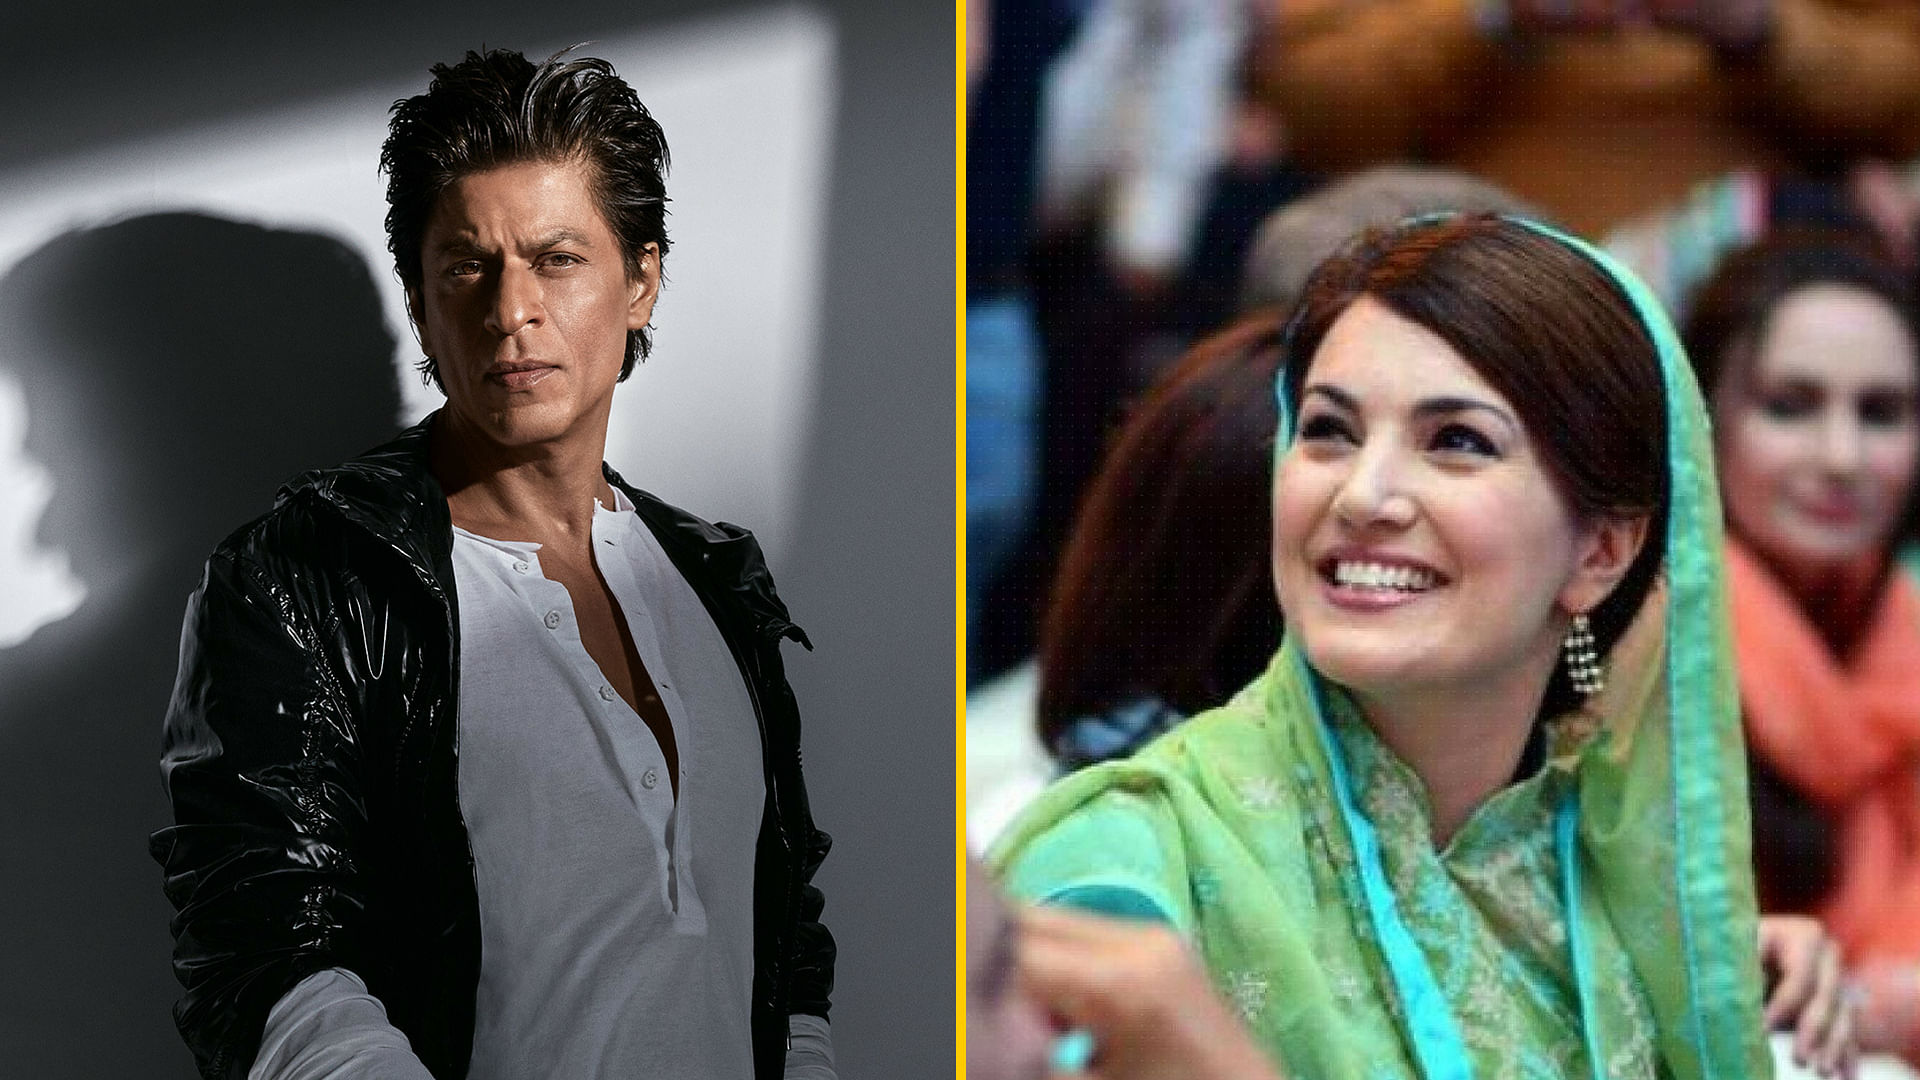 Reham Khan happened to meet Shah Rukh Khan as she hosted a stage at the London Mela.